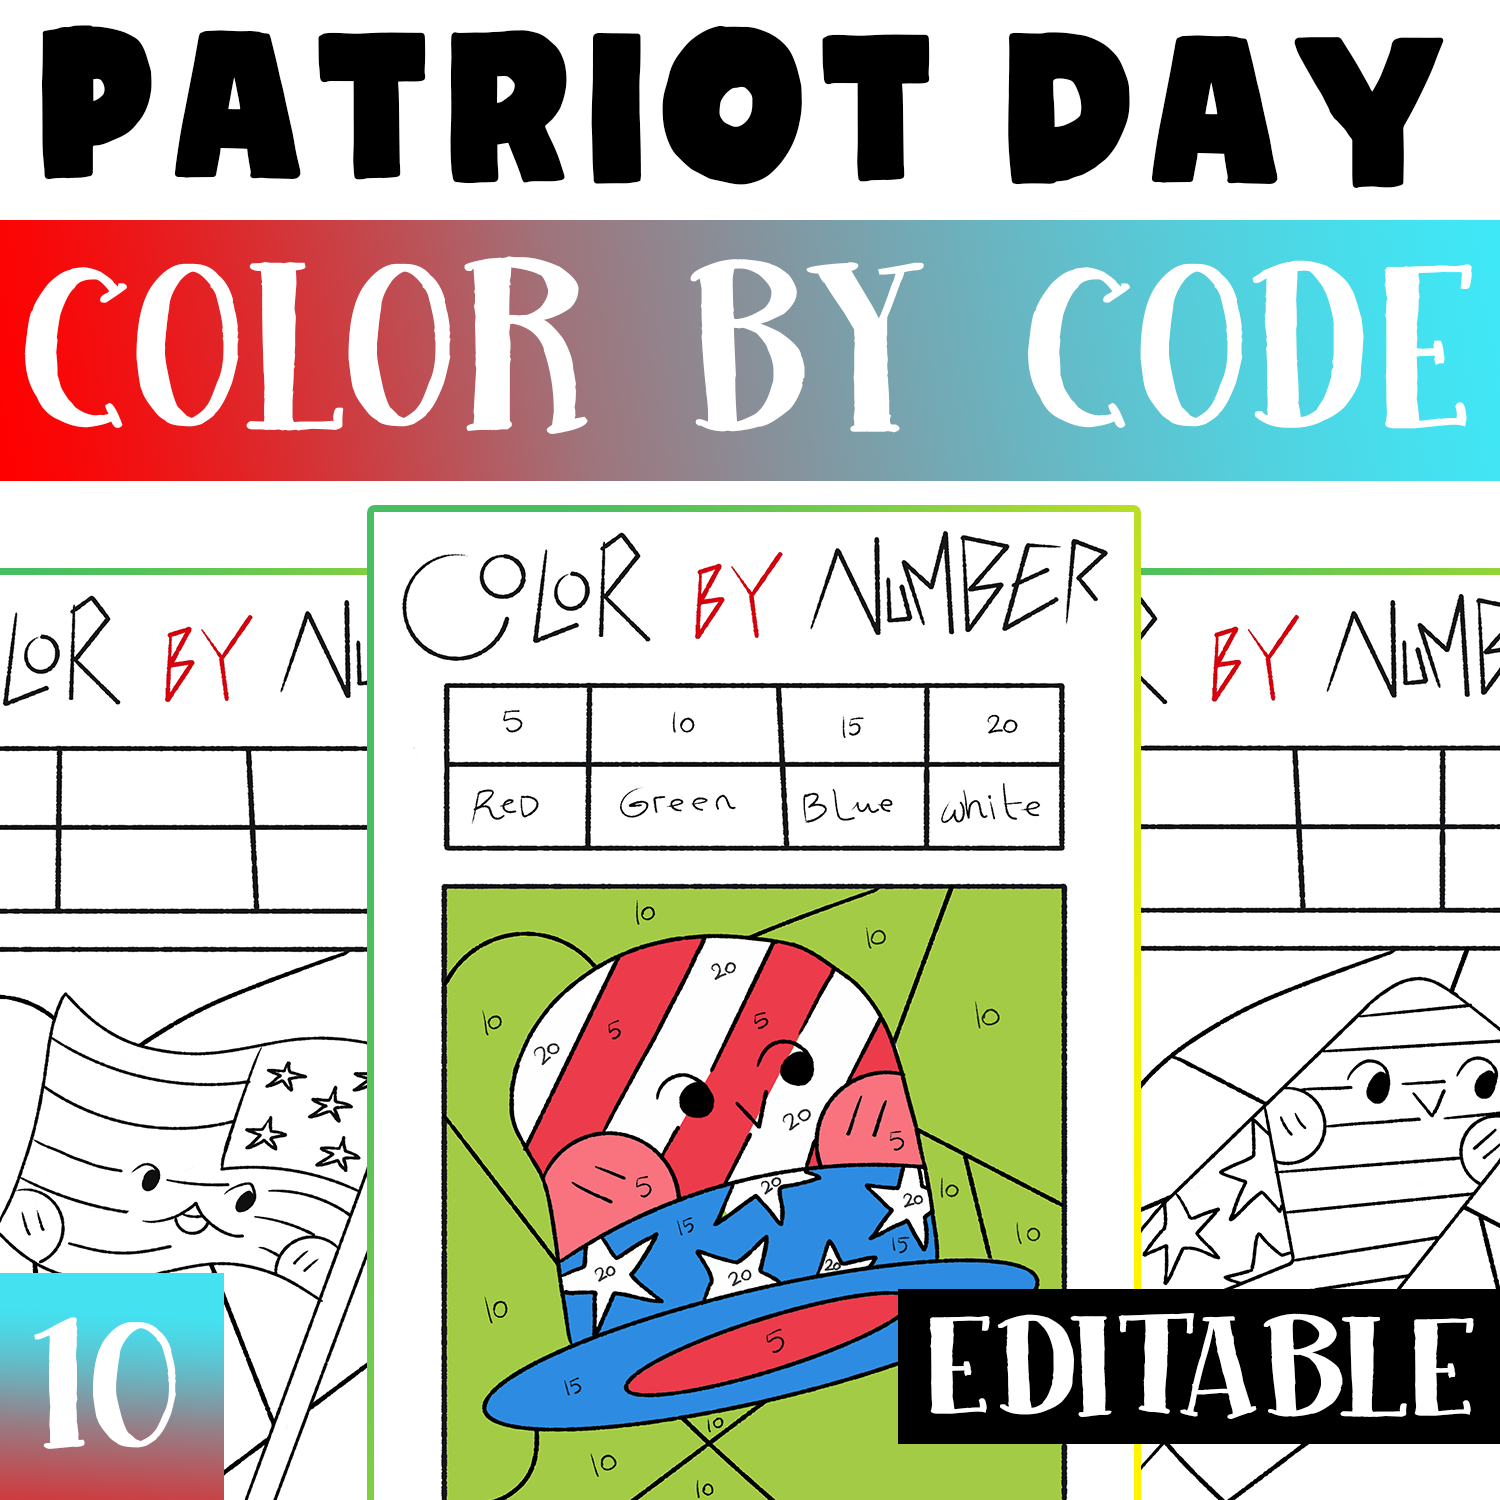 Patriot day editable color by code worksheets activity patriot color by numbers made by teachers